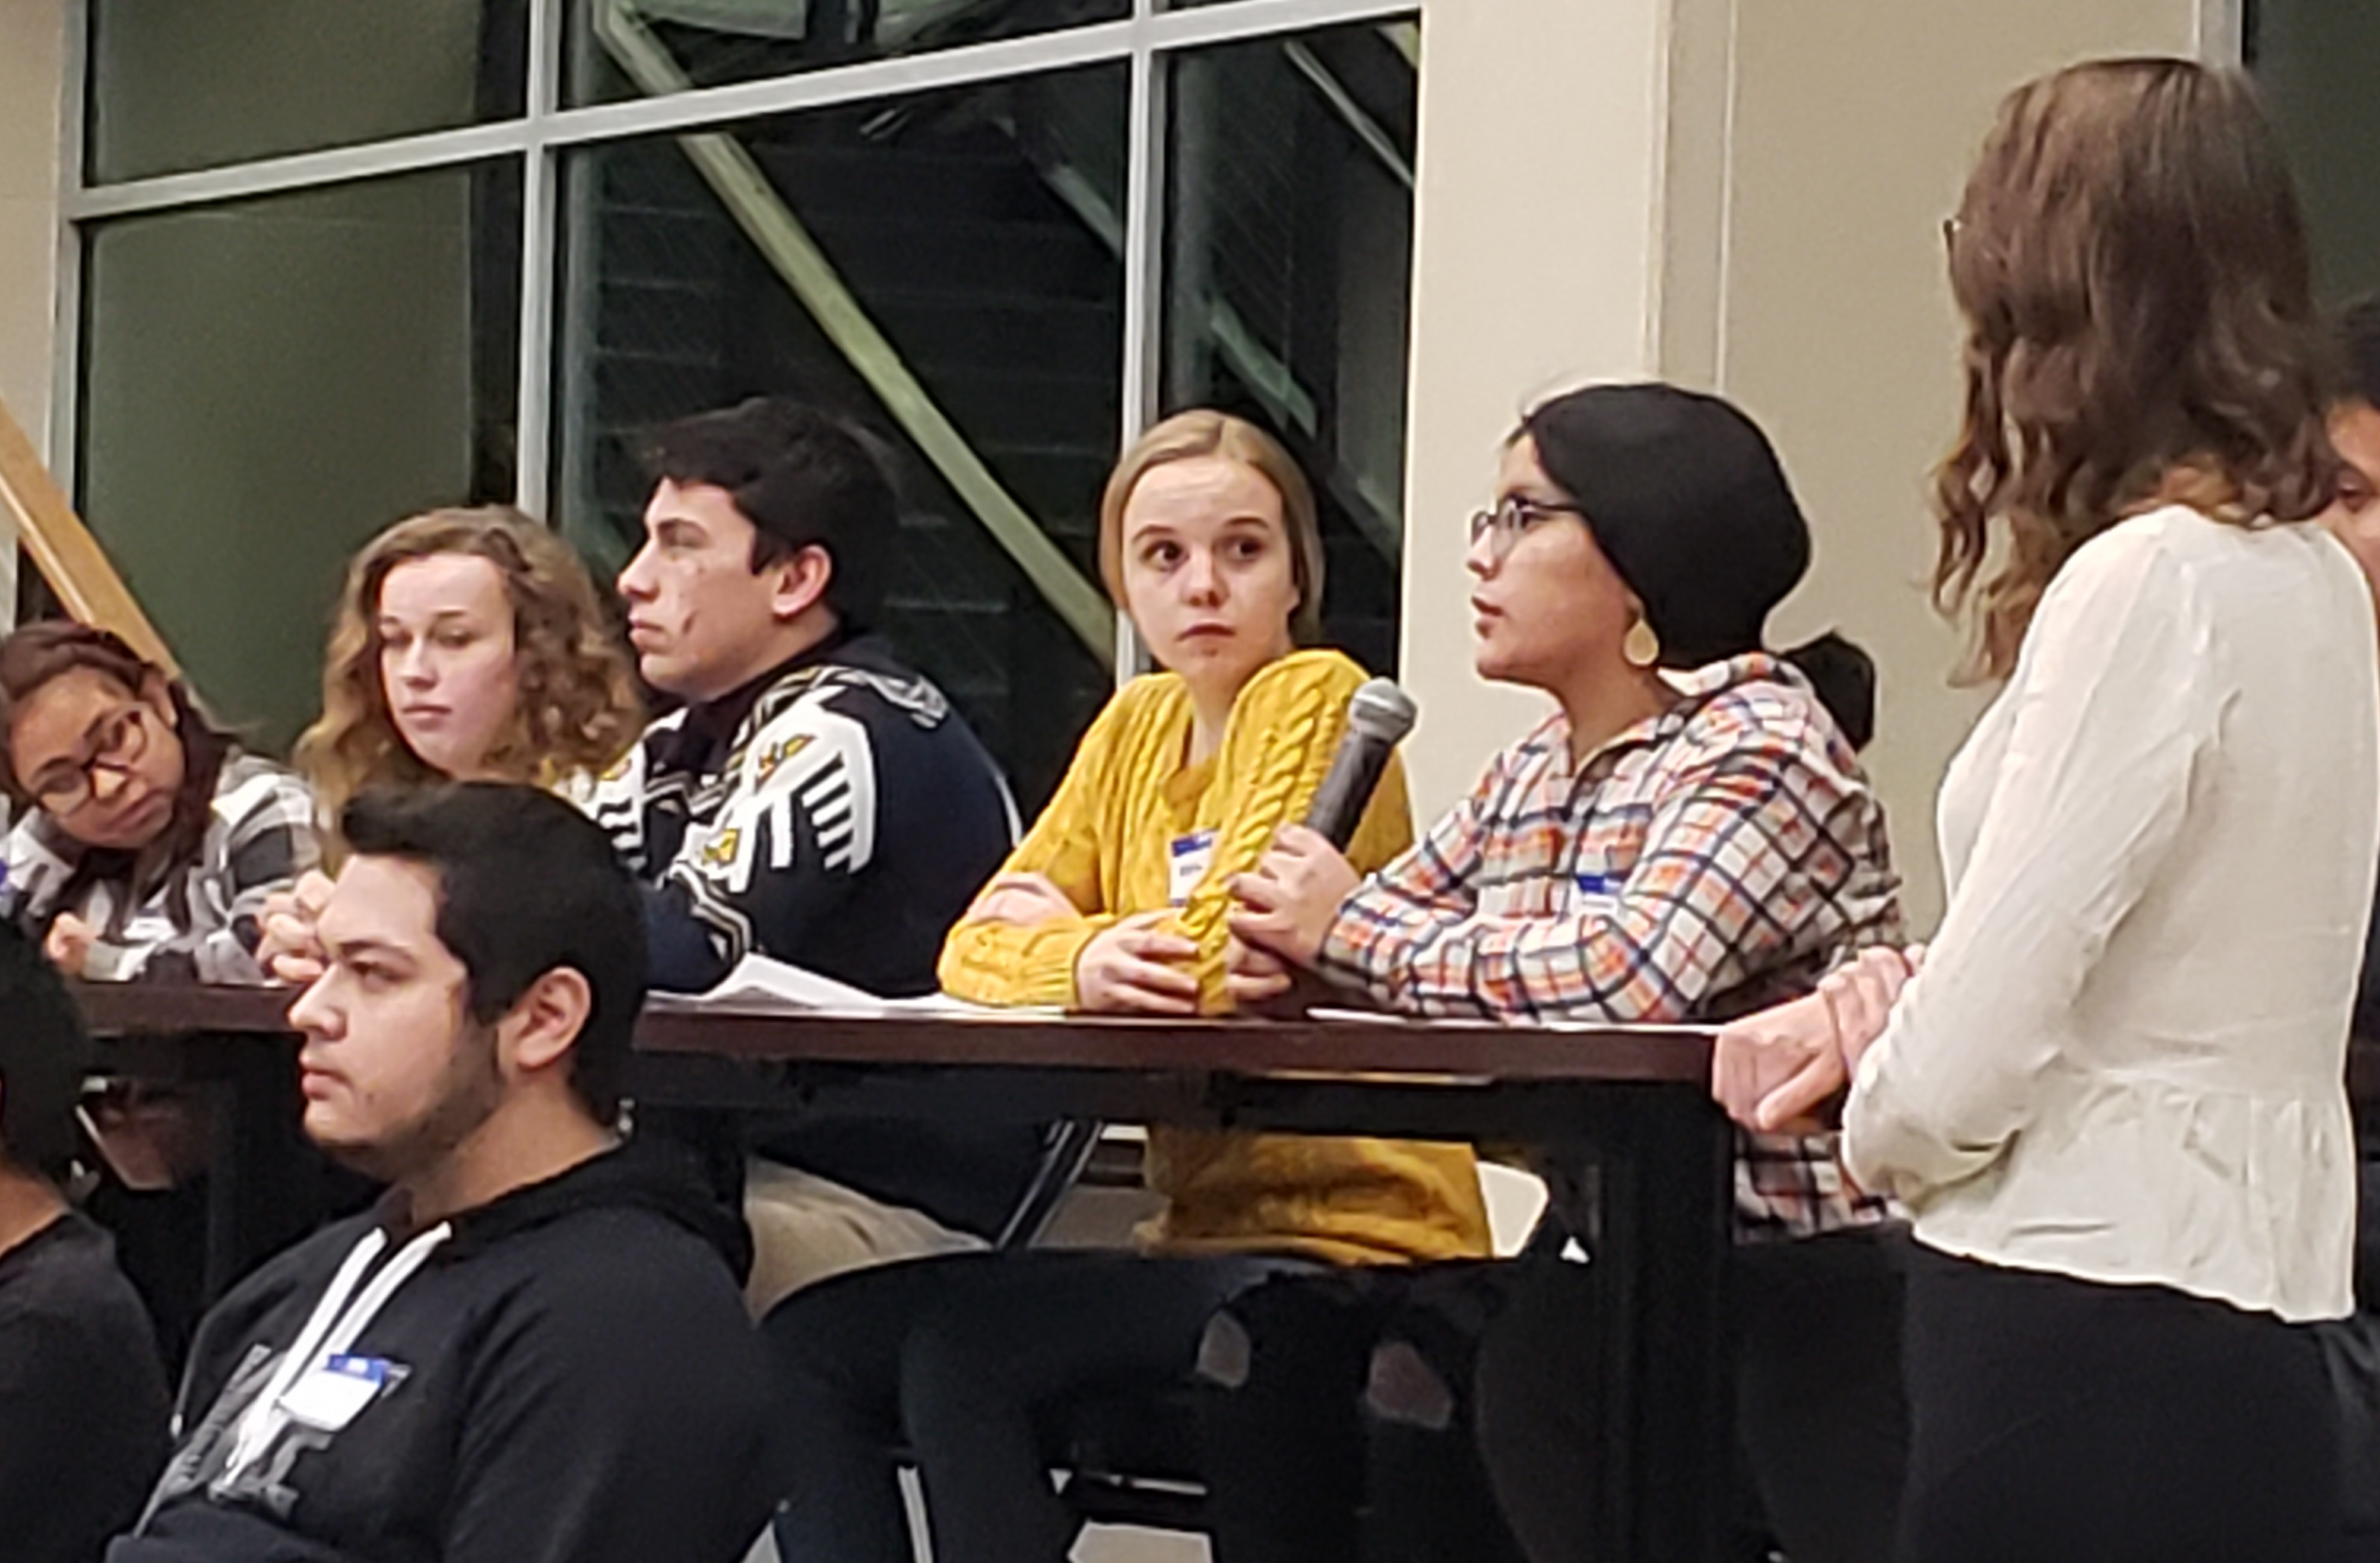 Baraboo High School students took part in a panel discussion on diversity at Baraboo High School in December 2019. Photo by Erik Gunn/Wisconsin Examiner.